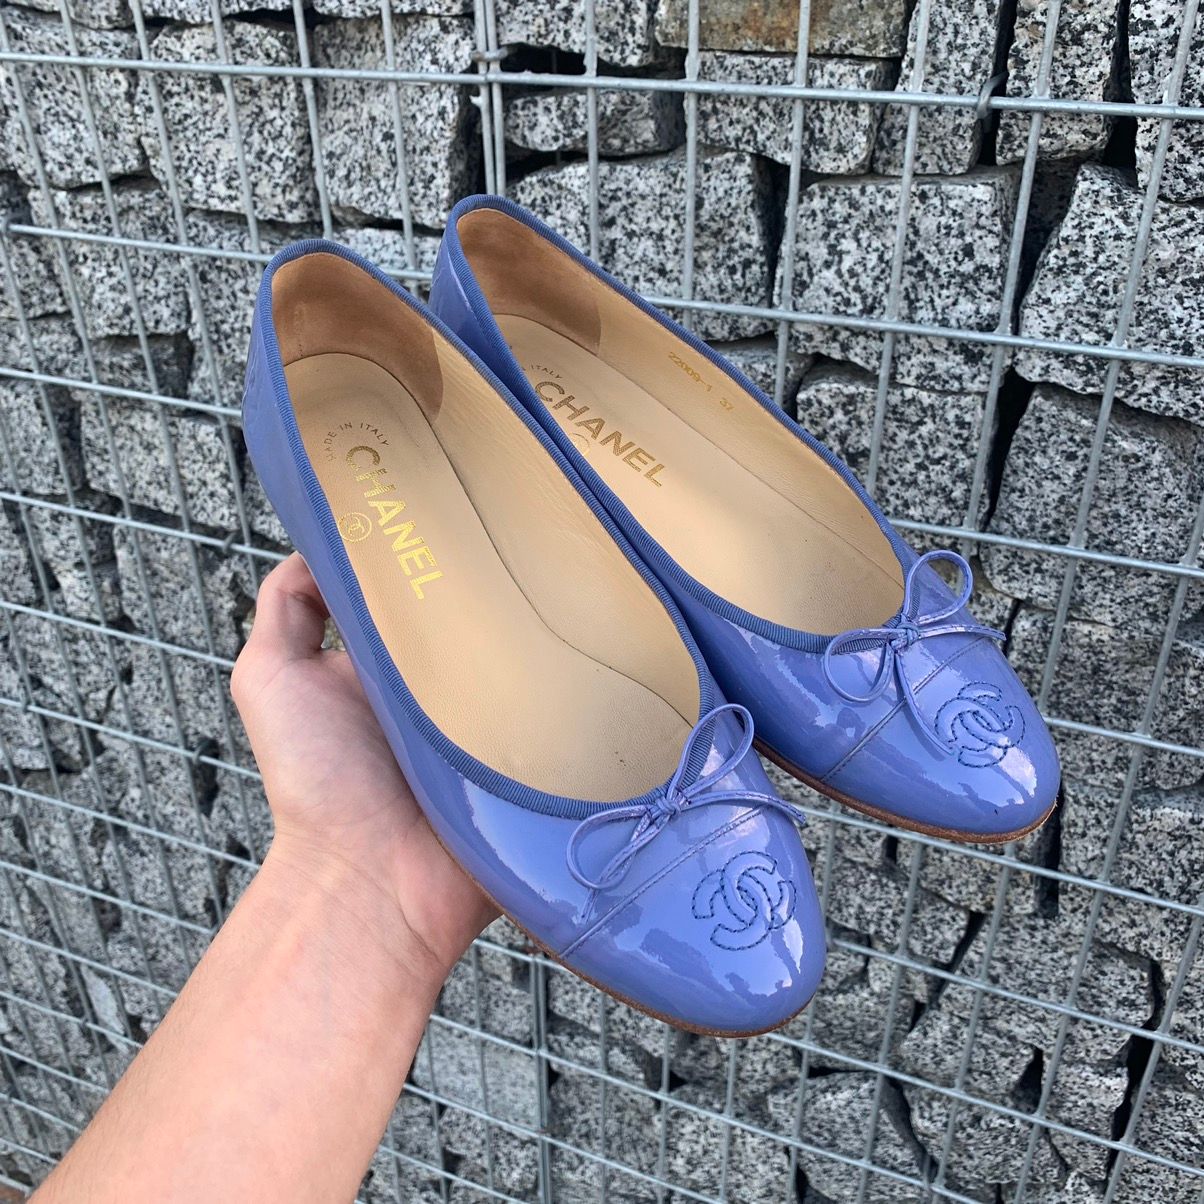 Chanel Chanel Blue Leather Ballerina Flats